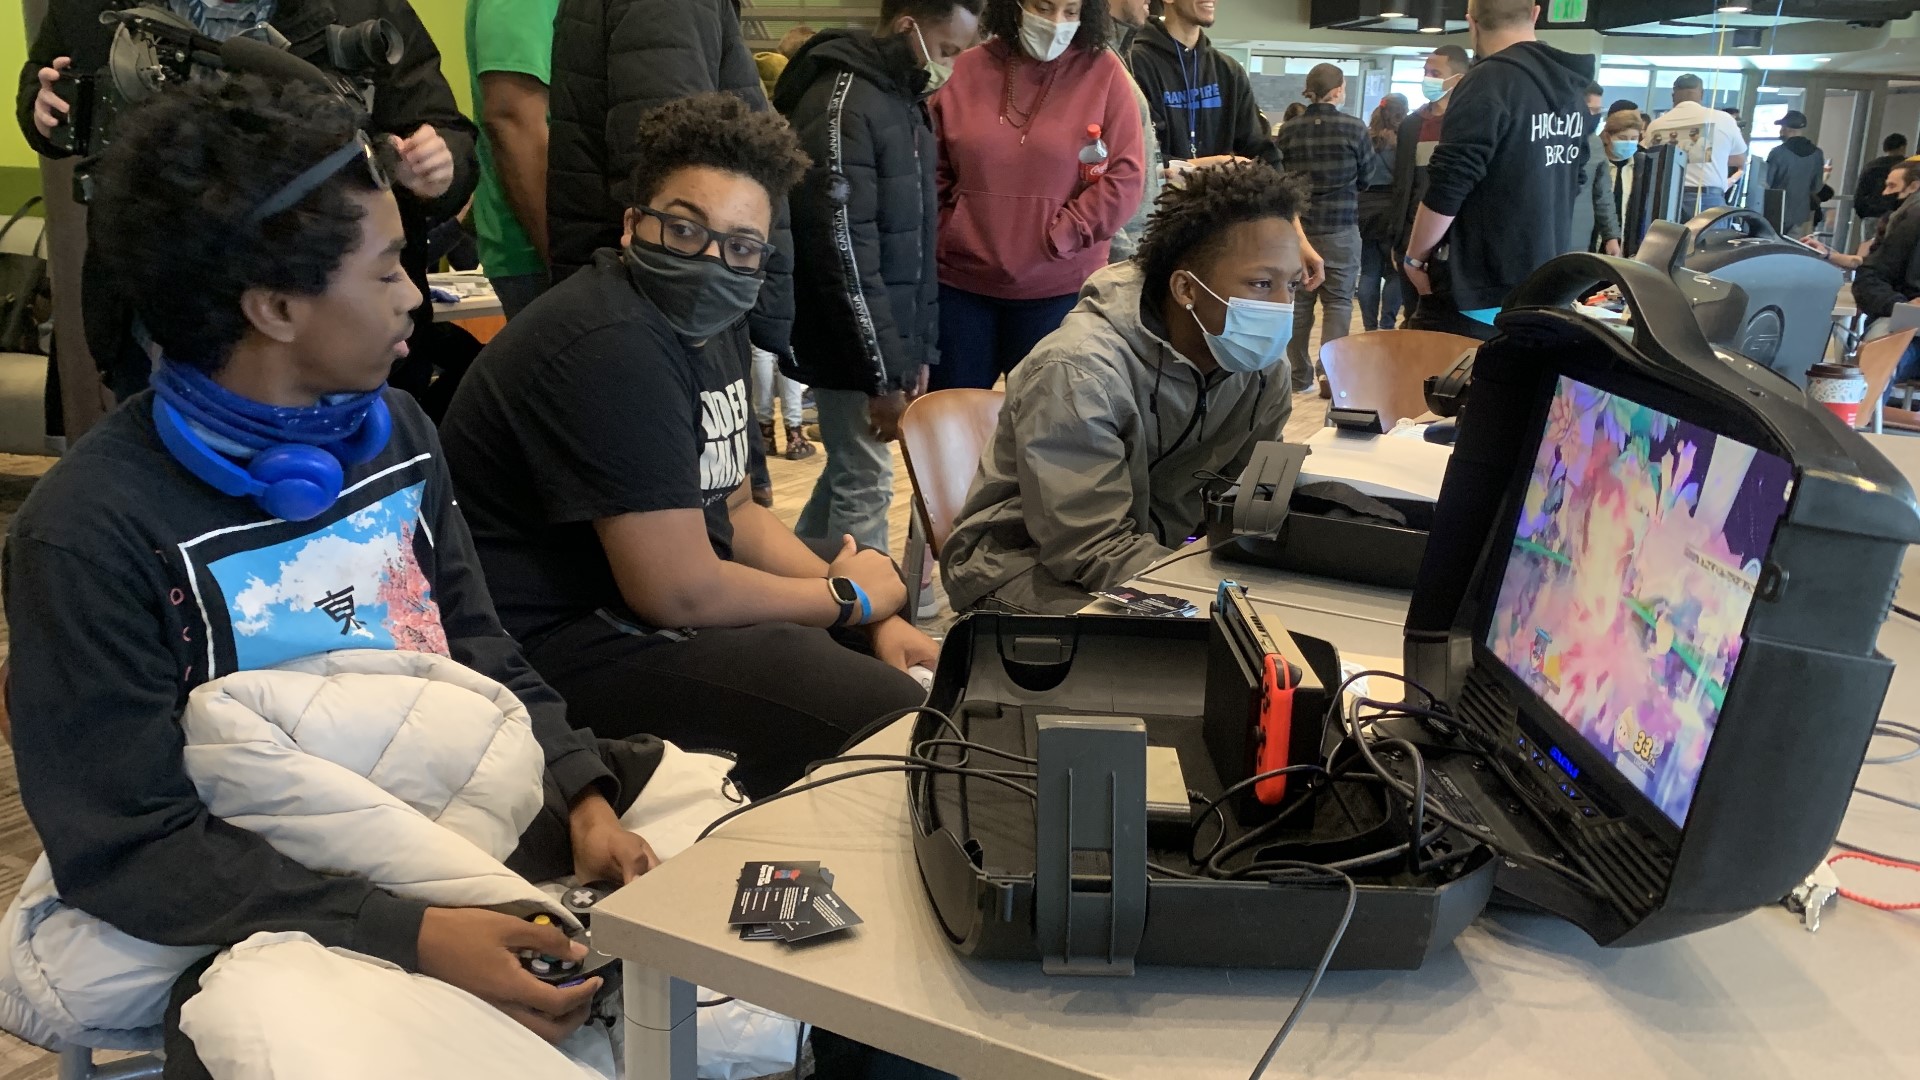 Black Tech Talent hosted the event to connect Minneapolis families with opportunities in tech, a field where Black Americans are largely underrepresented.